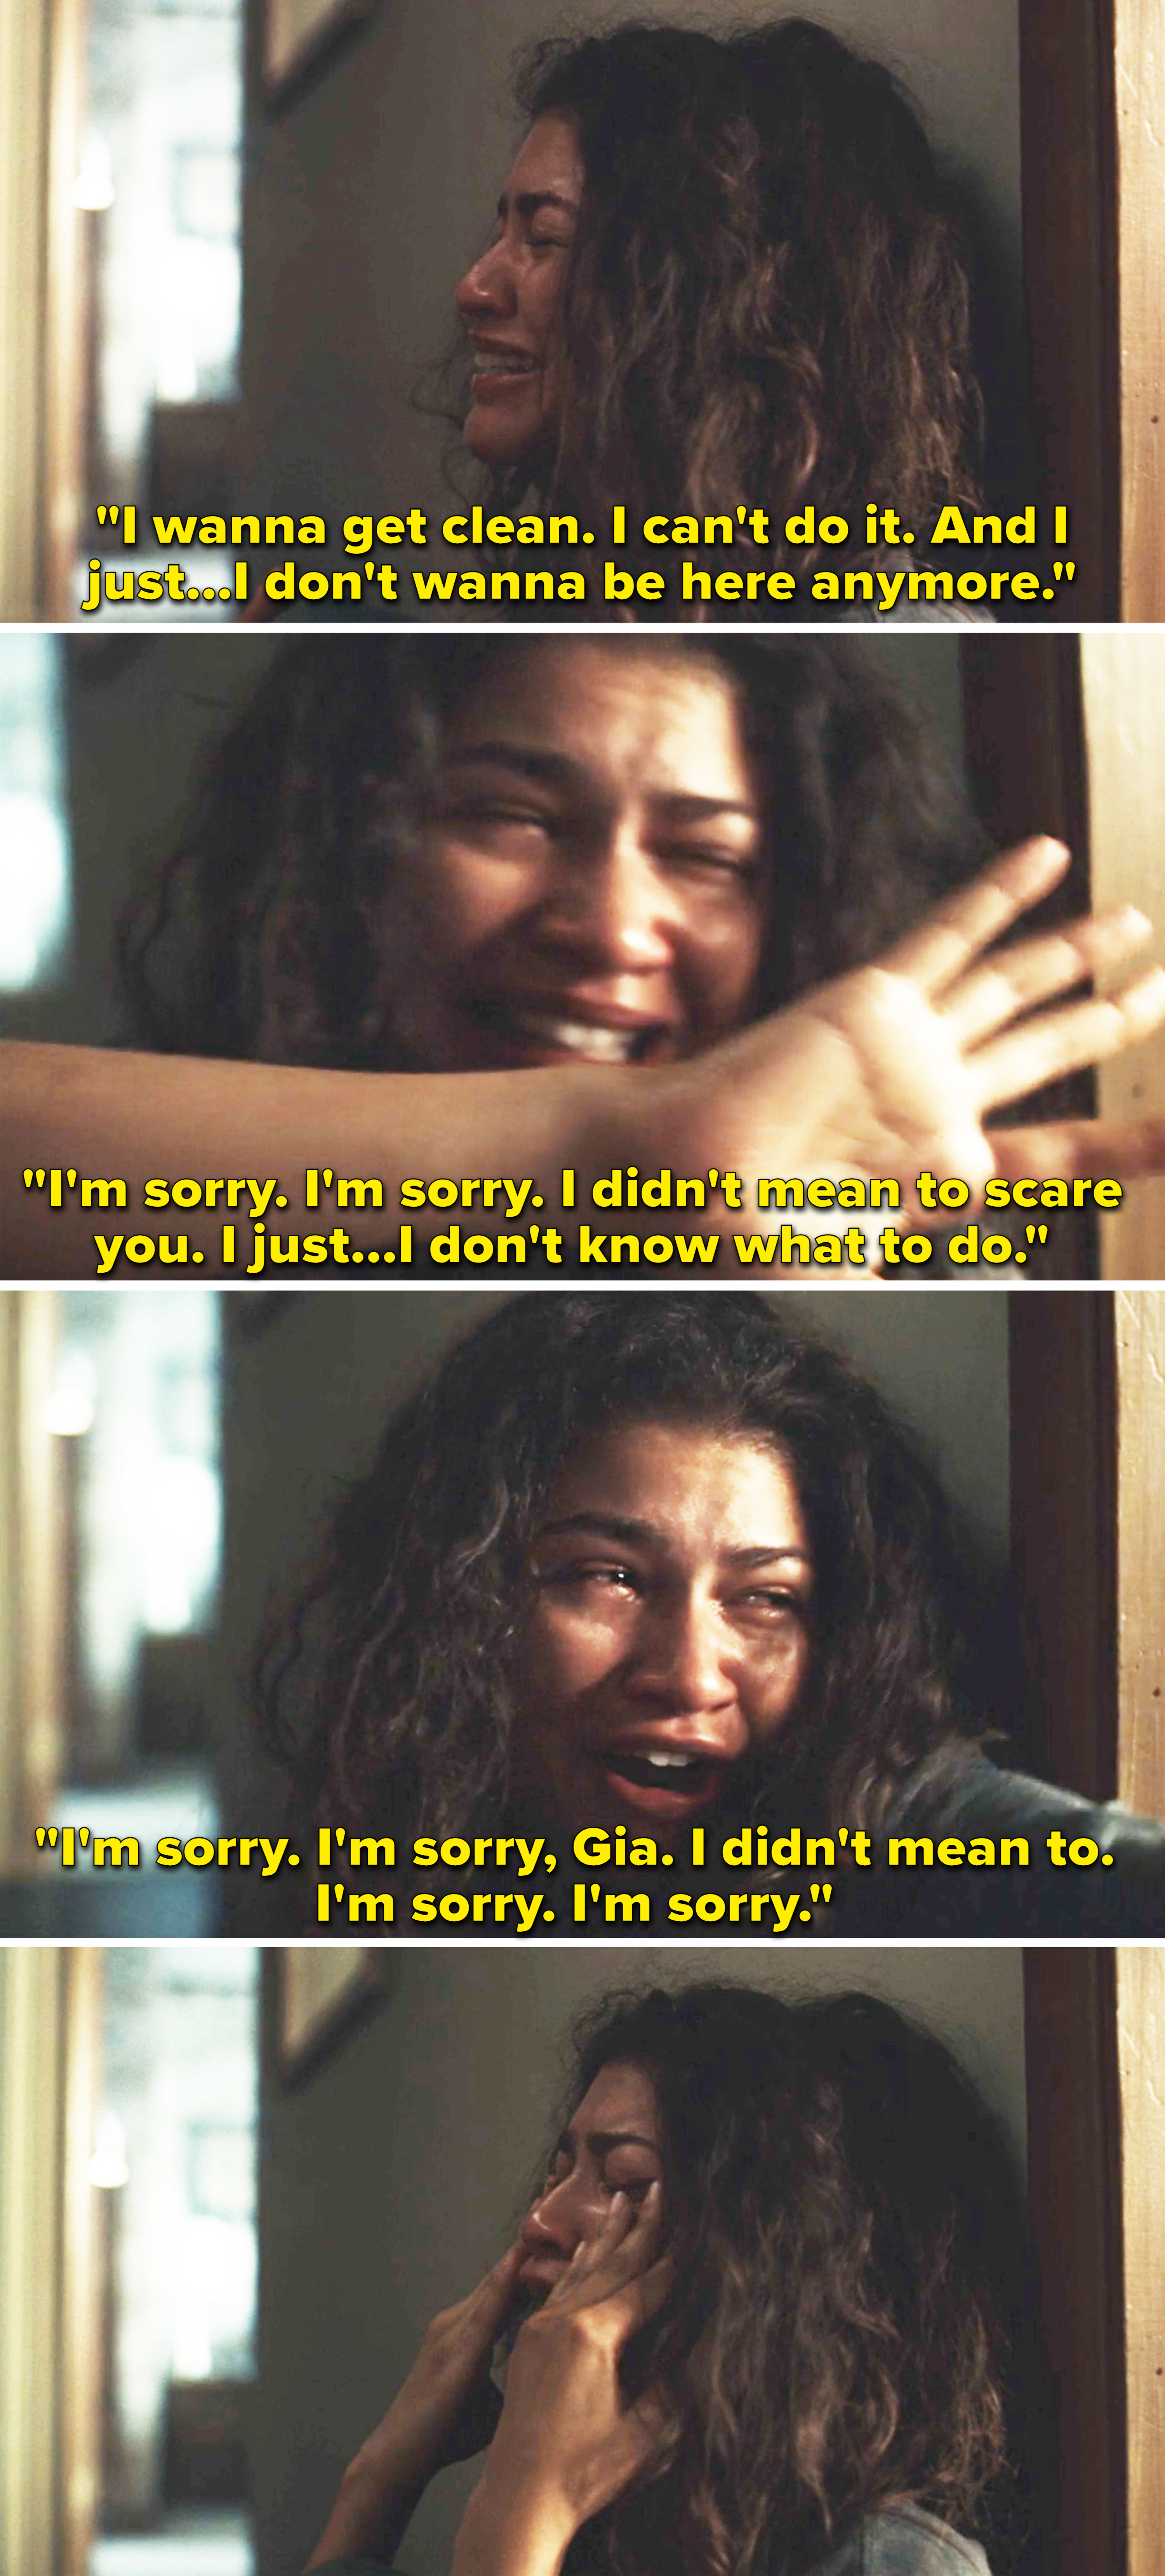 Zendaya as Rue in Euphoria crying and telling her sister that she&#x27;s sorry and wants to get clean